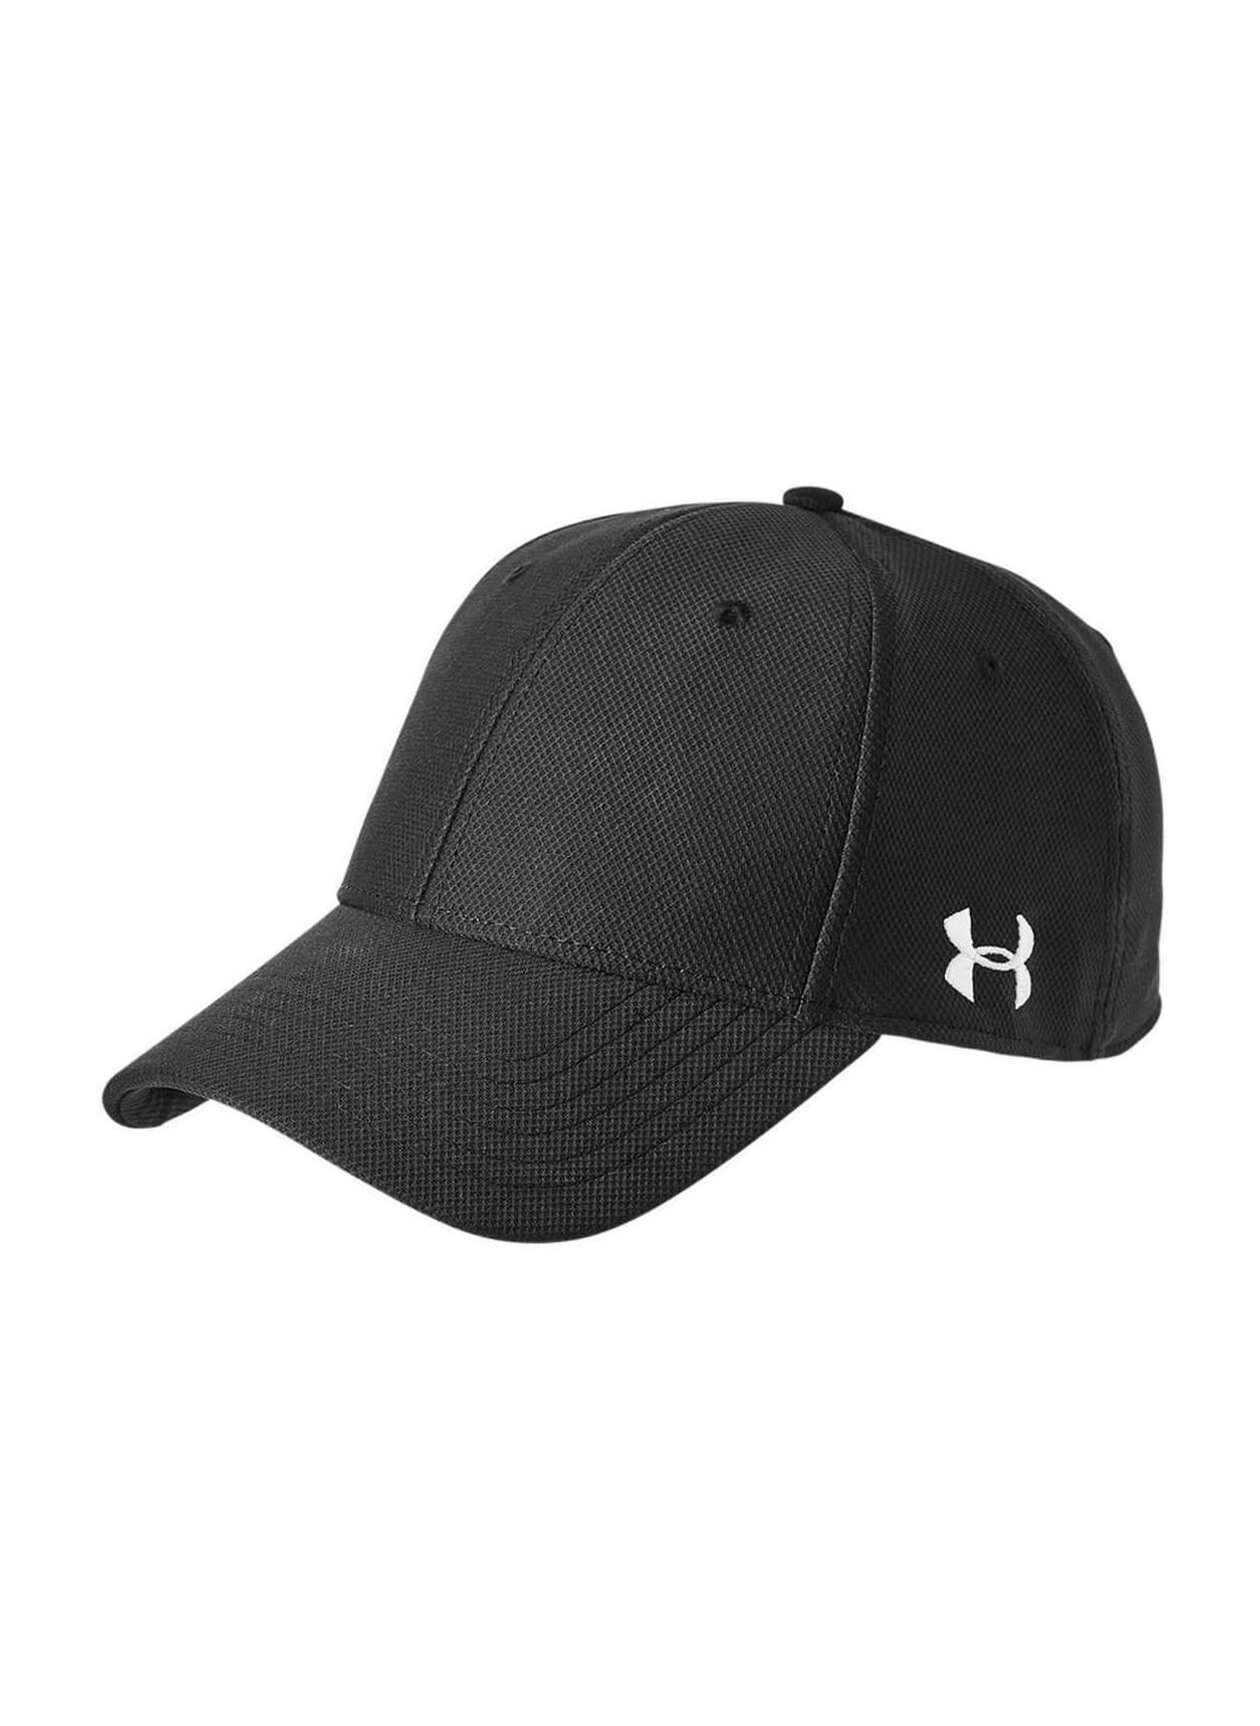 Under Armour Blitzing Curved Hat | Under Armour Custom Logo Hats